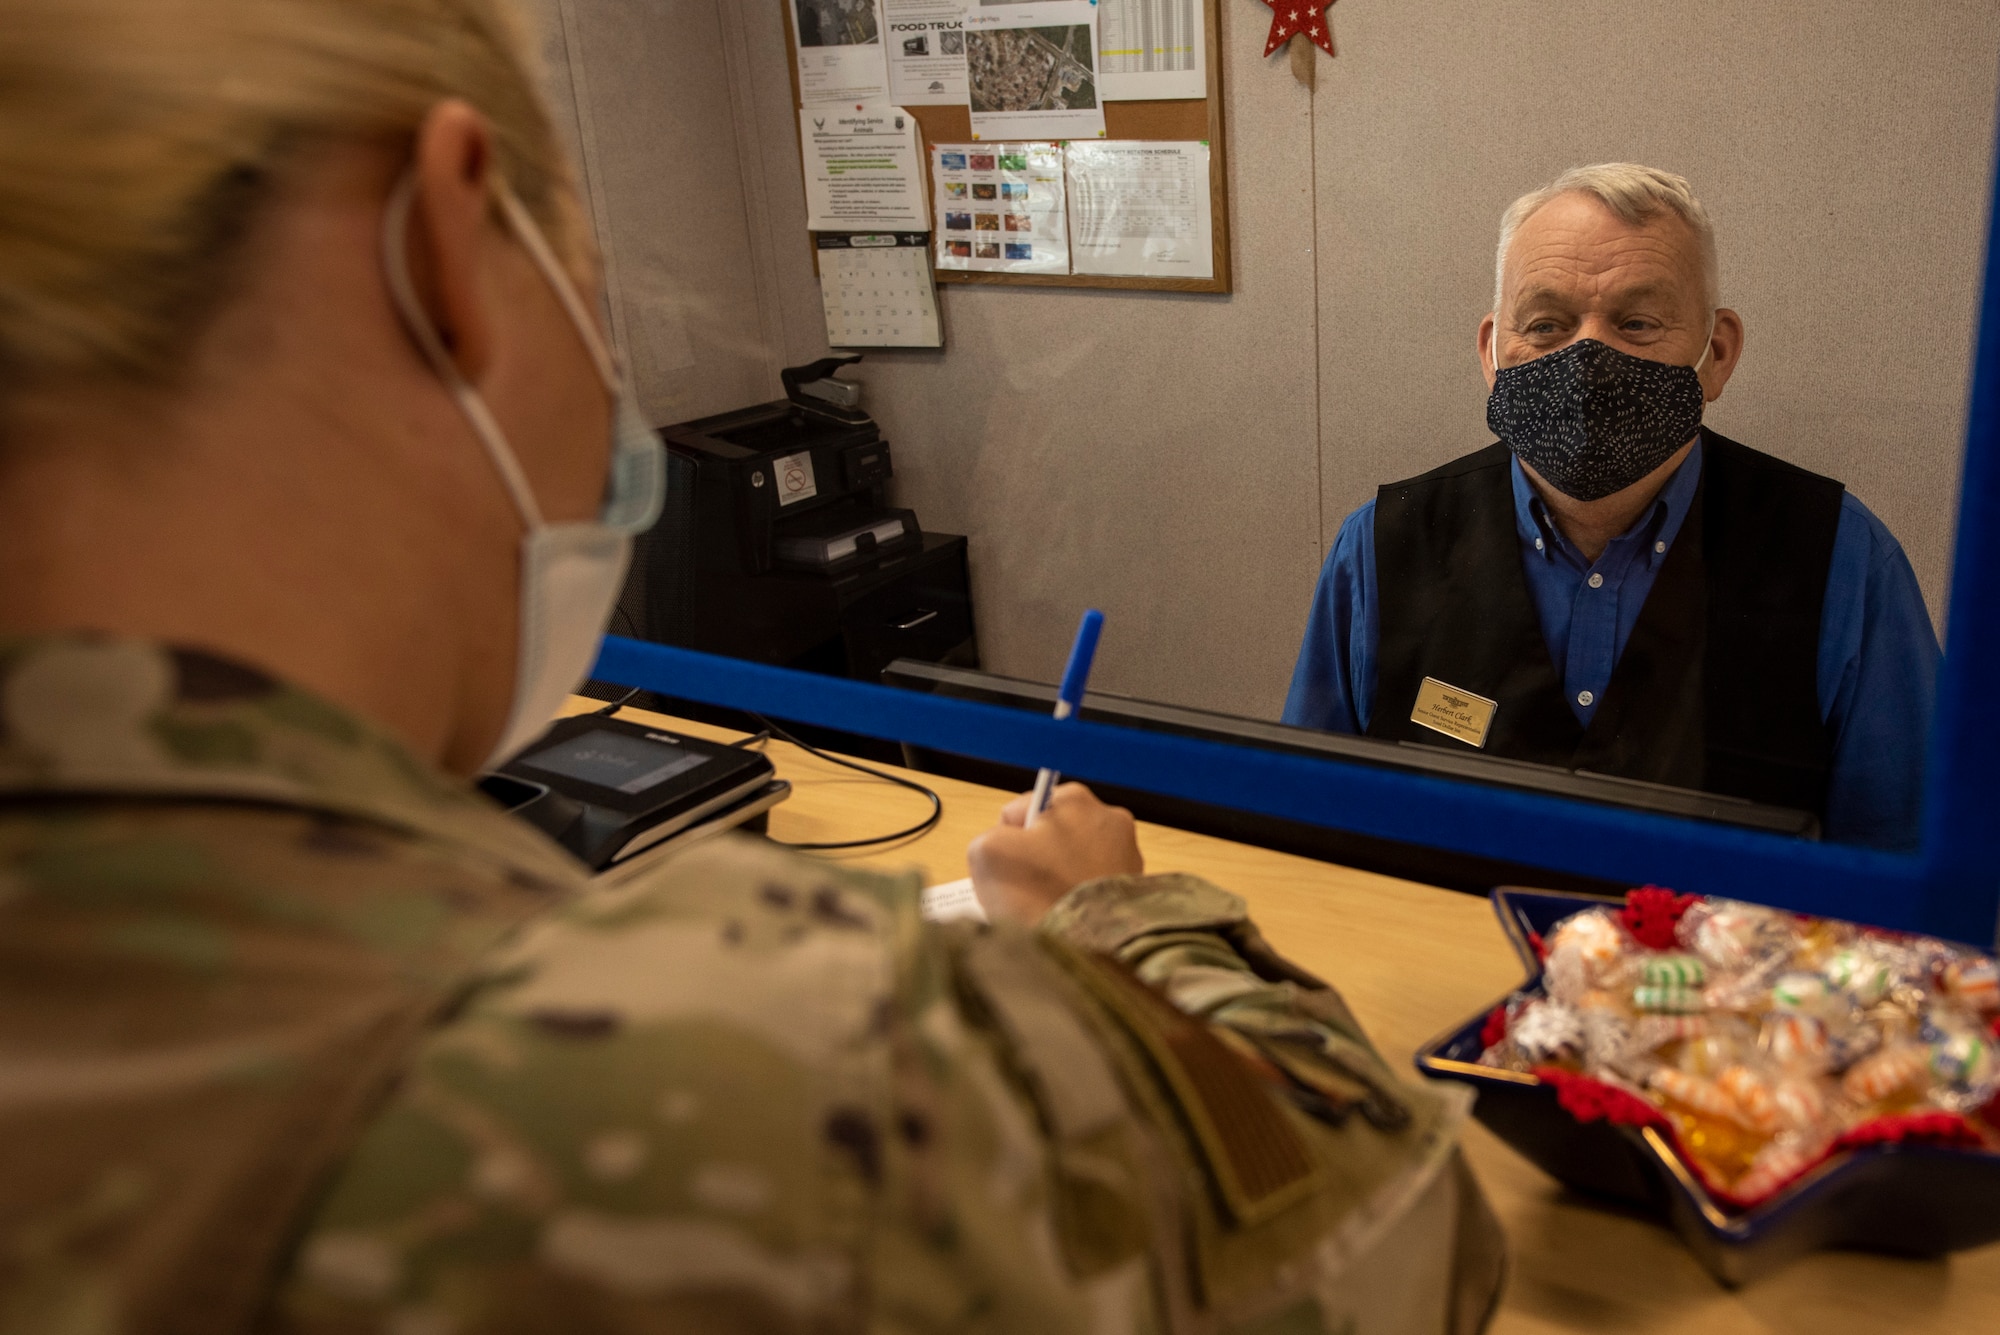 Airman checks in at the front desk